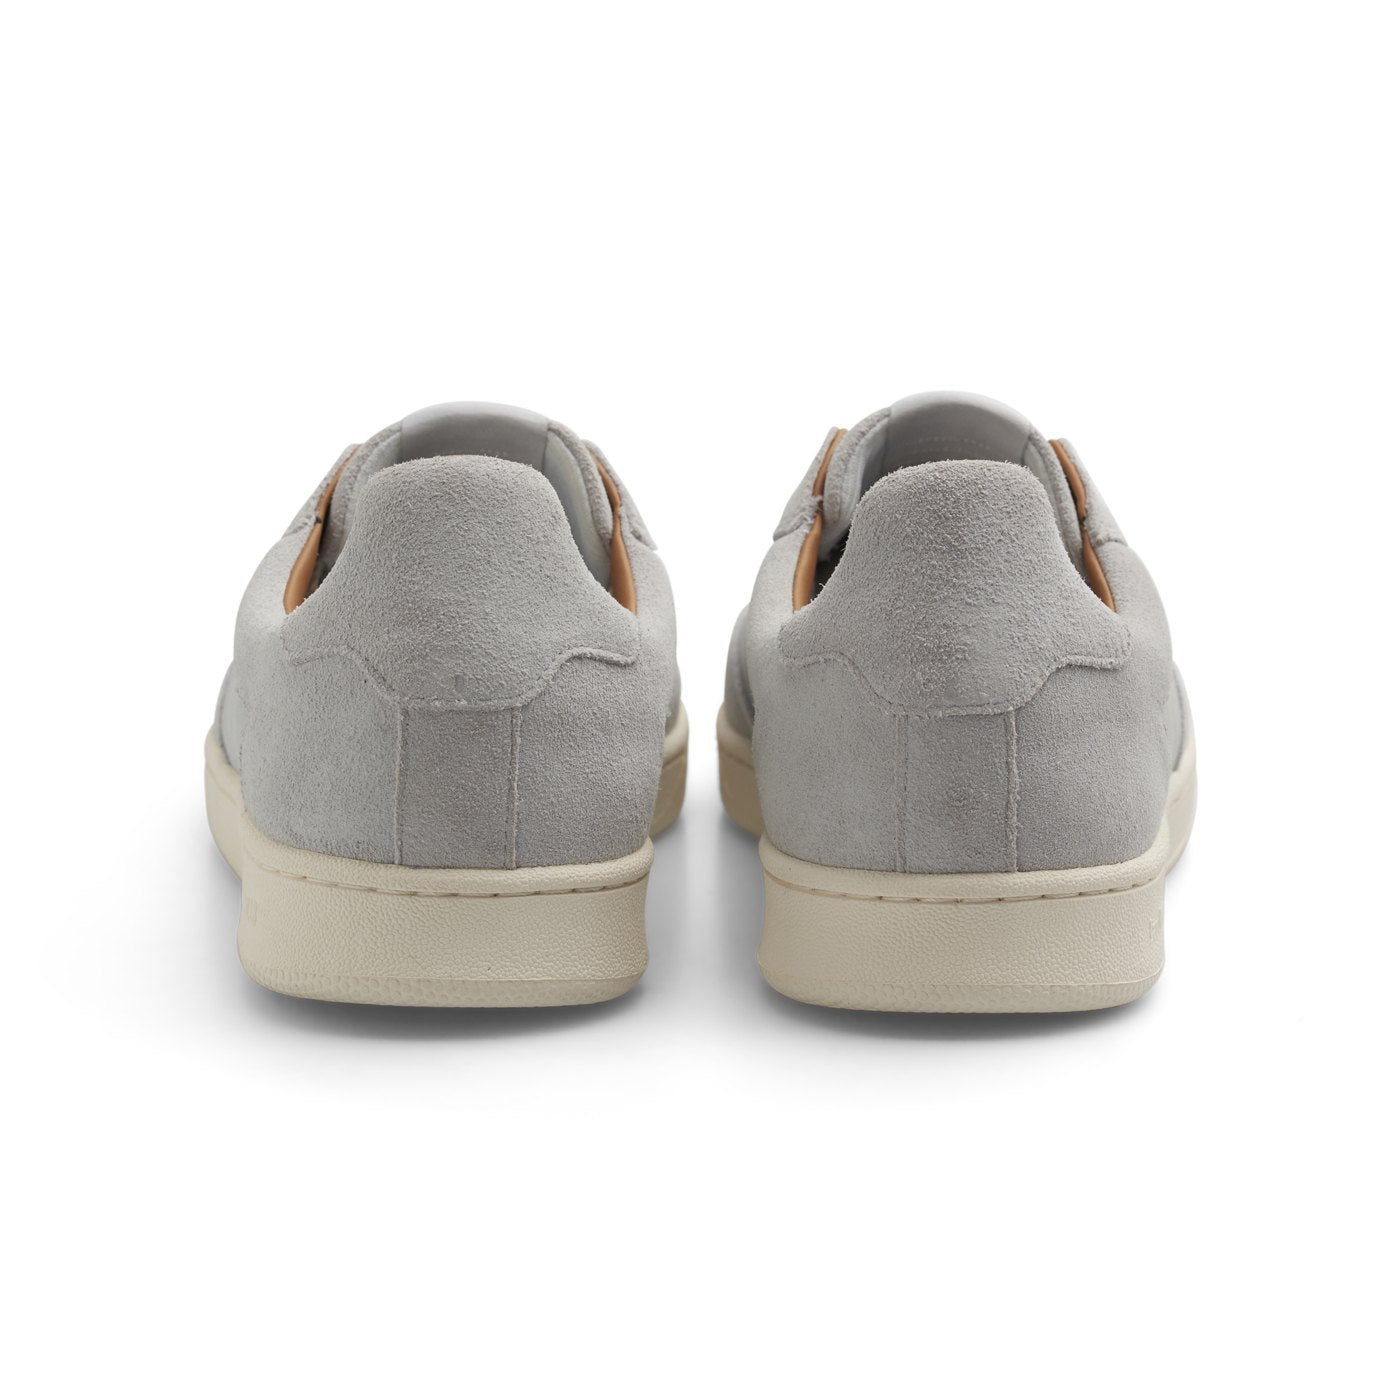 CM001 Suede / Leather Lo - Lt Grey / White